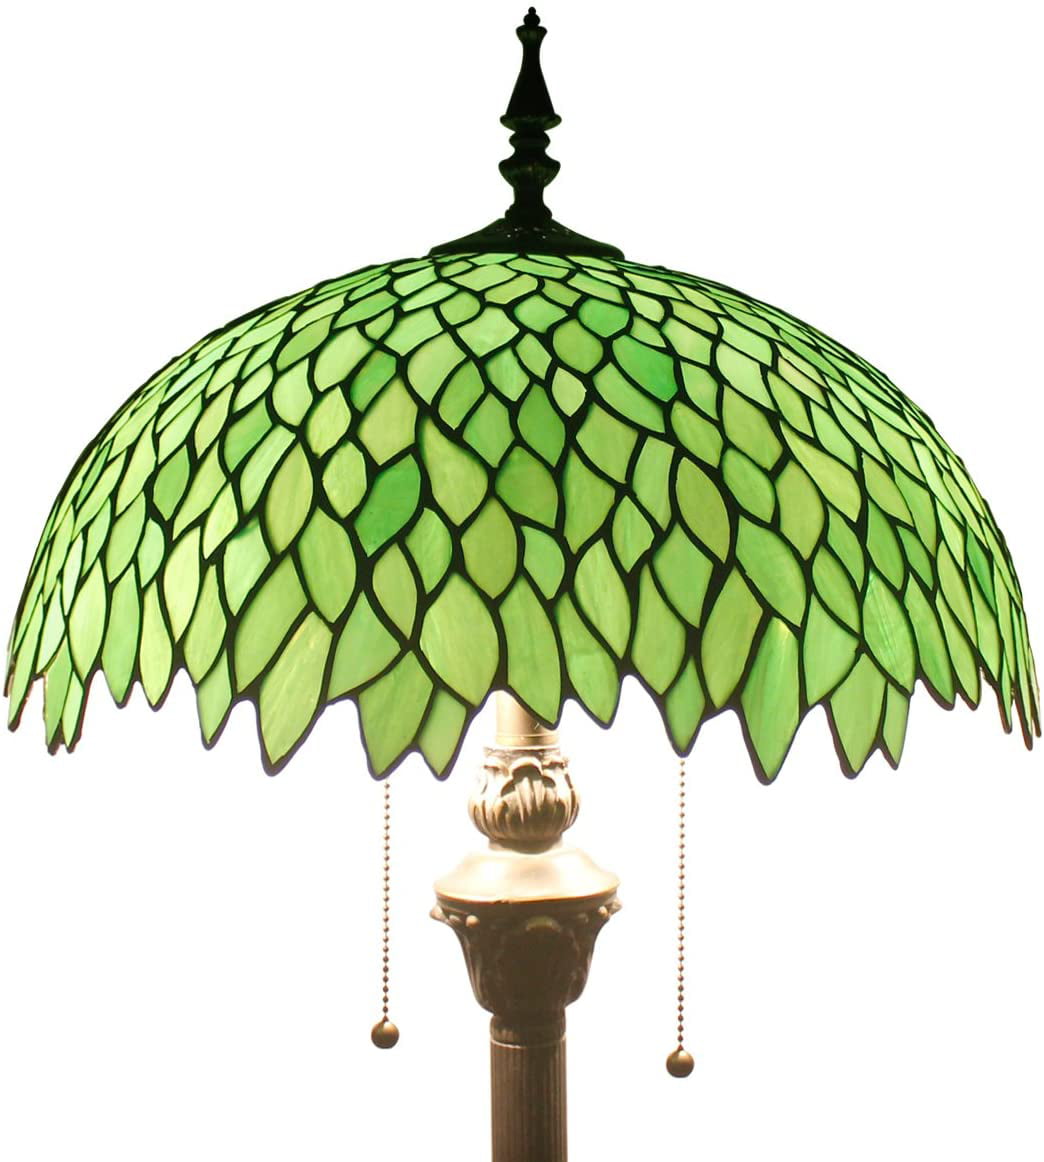  Floor Lamp Green Wisteria Stained Glass Standing Reading Light 16X16X64 Inches Antique Style Pole Corner Lamp Decor Bedroom Living Room Home Office S523 Series